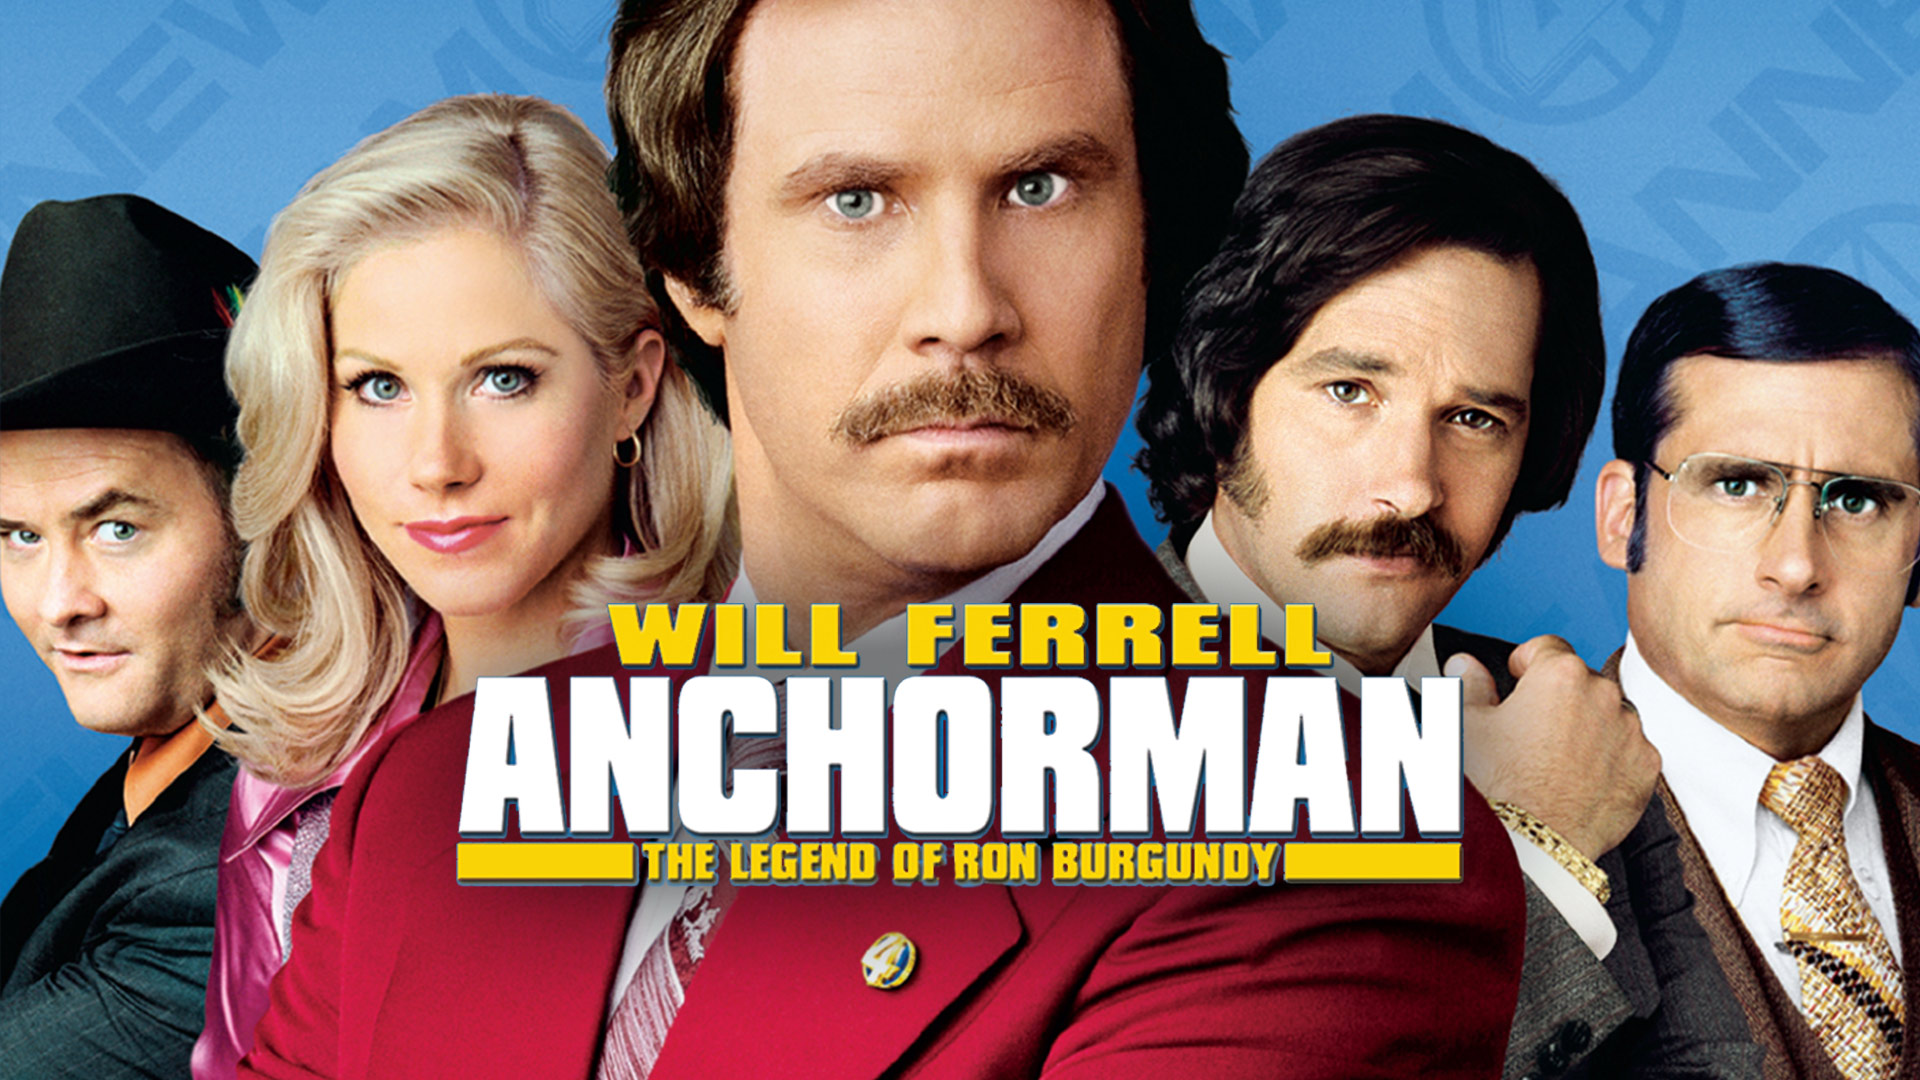 Anchorman: The Legend of Ron Burgundy (2004) Review – Stay Classy, San Diego